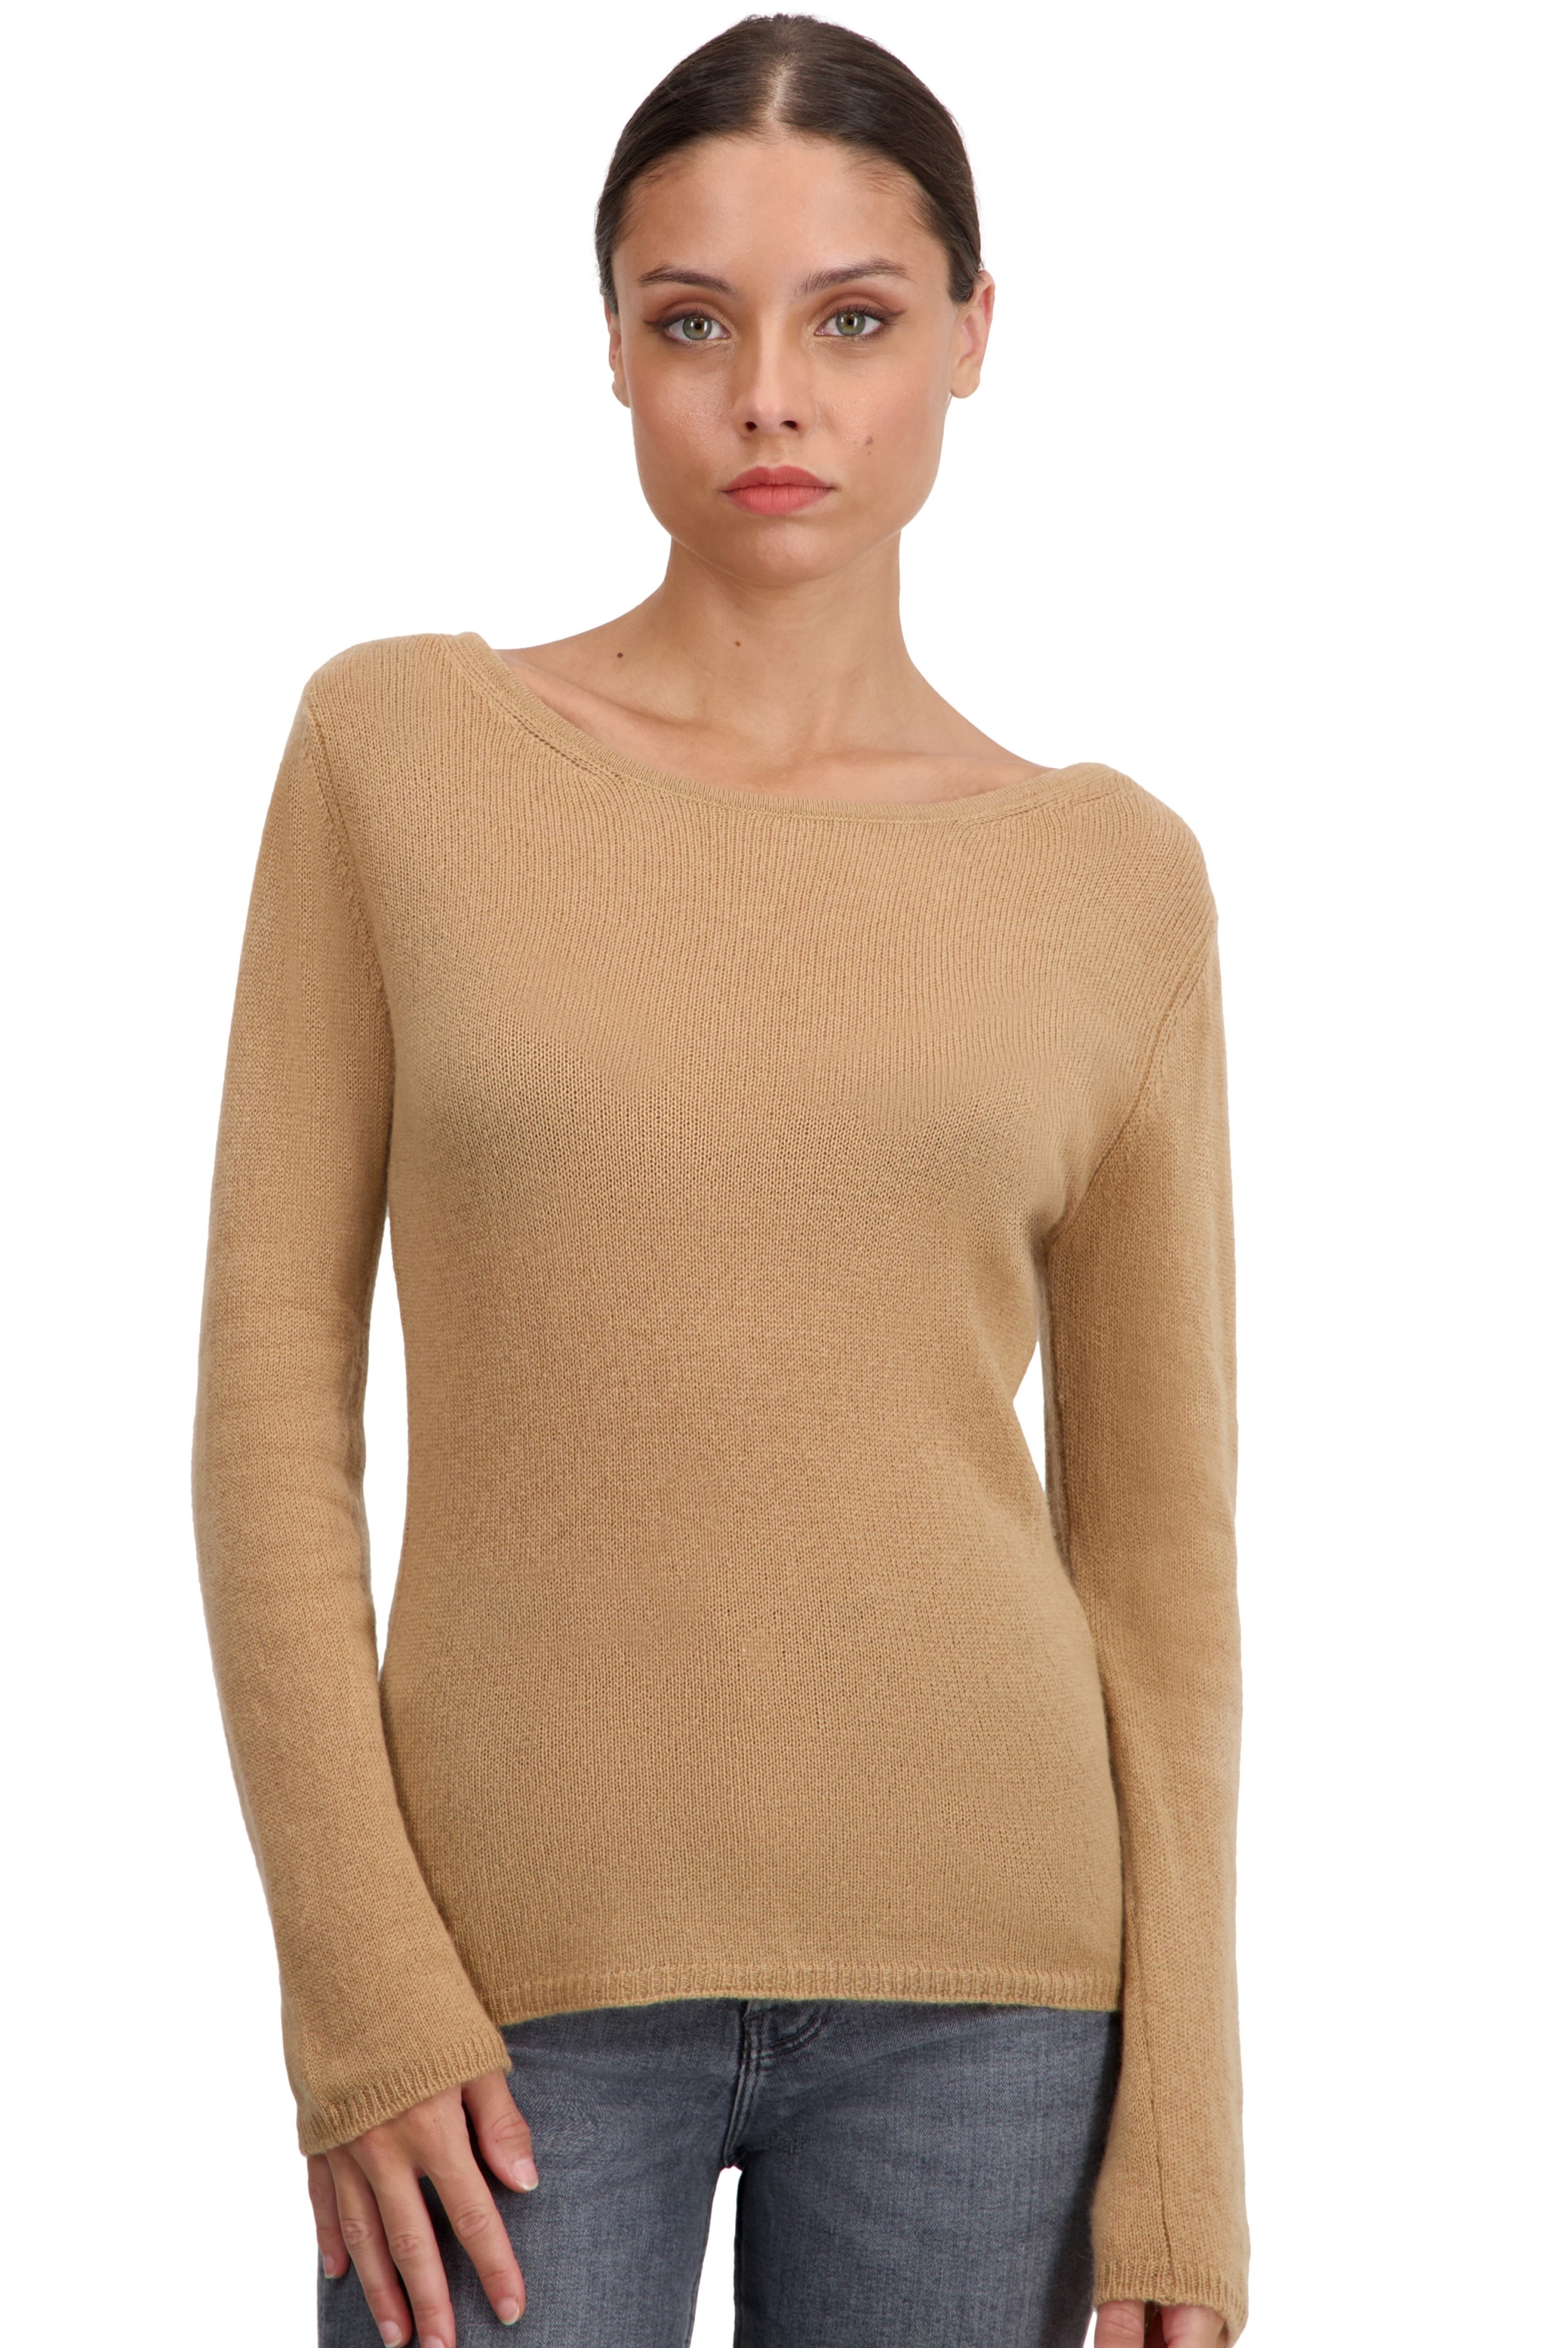 Cashmere ladies basic sweaters at low prices caleen camel xs